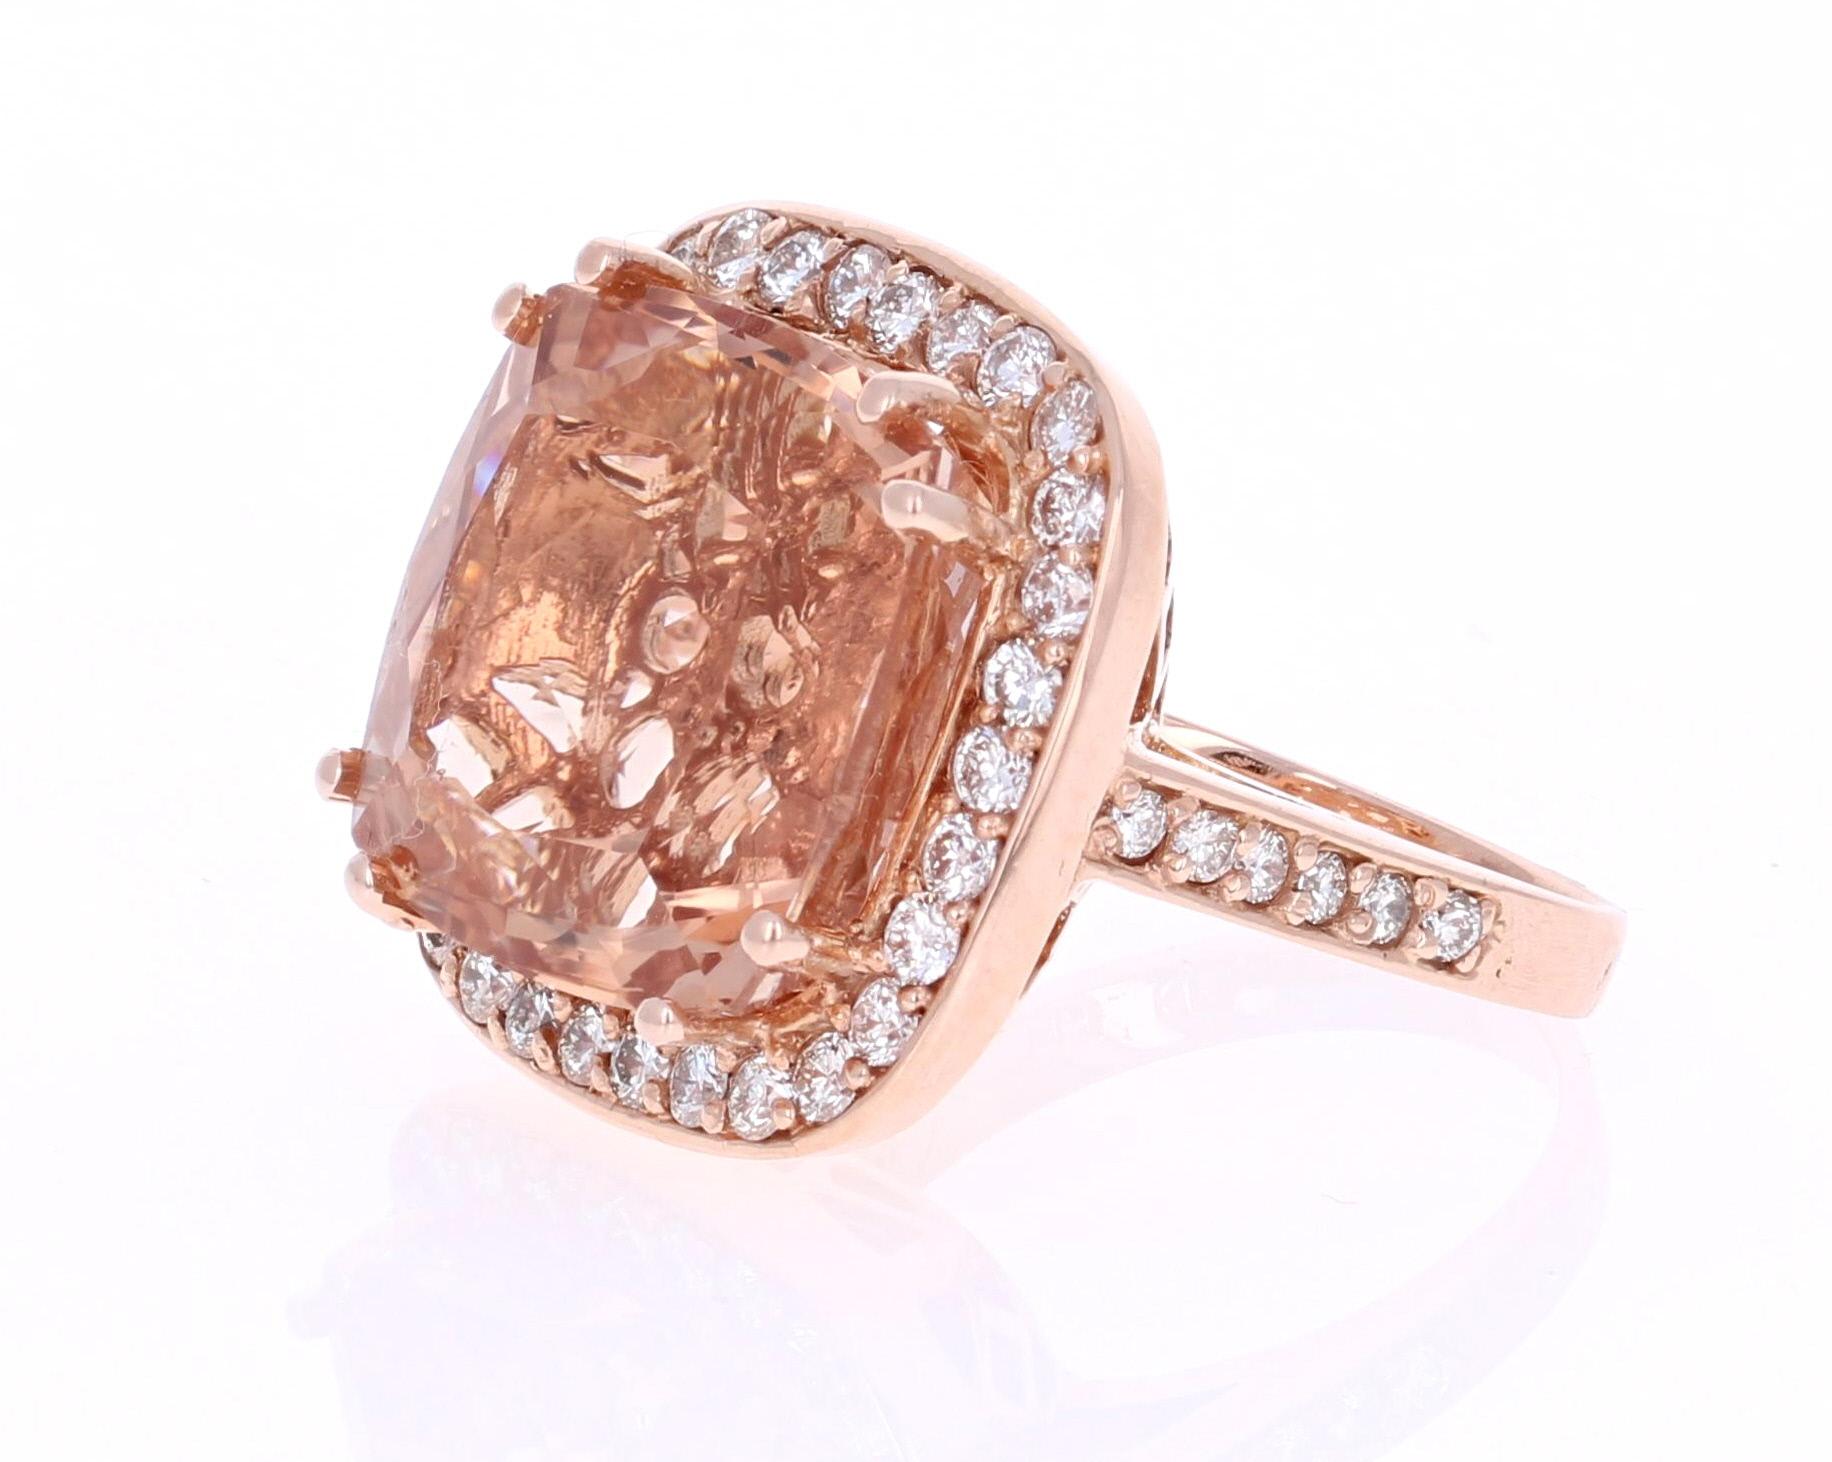 Statement Morganite Diamond Ring! 

This Morganite ring has a 19.01 Carat Square-Cushion Cut Morganite and is surrounded by 42 Round Cut Diamonds that weigh 1.22 Carats. The total carat weight of the ring is 20.23 Carats.  

It is set in 14 Karat